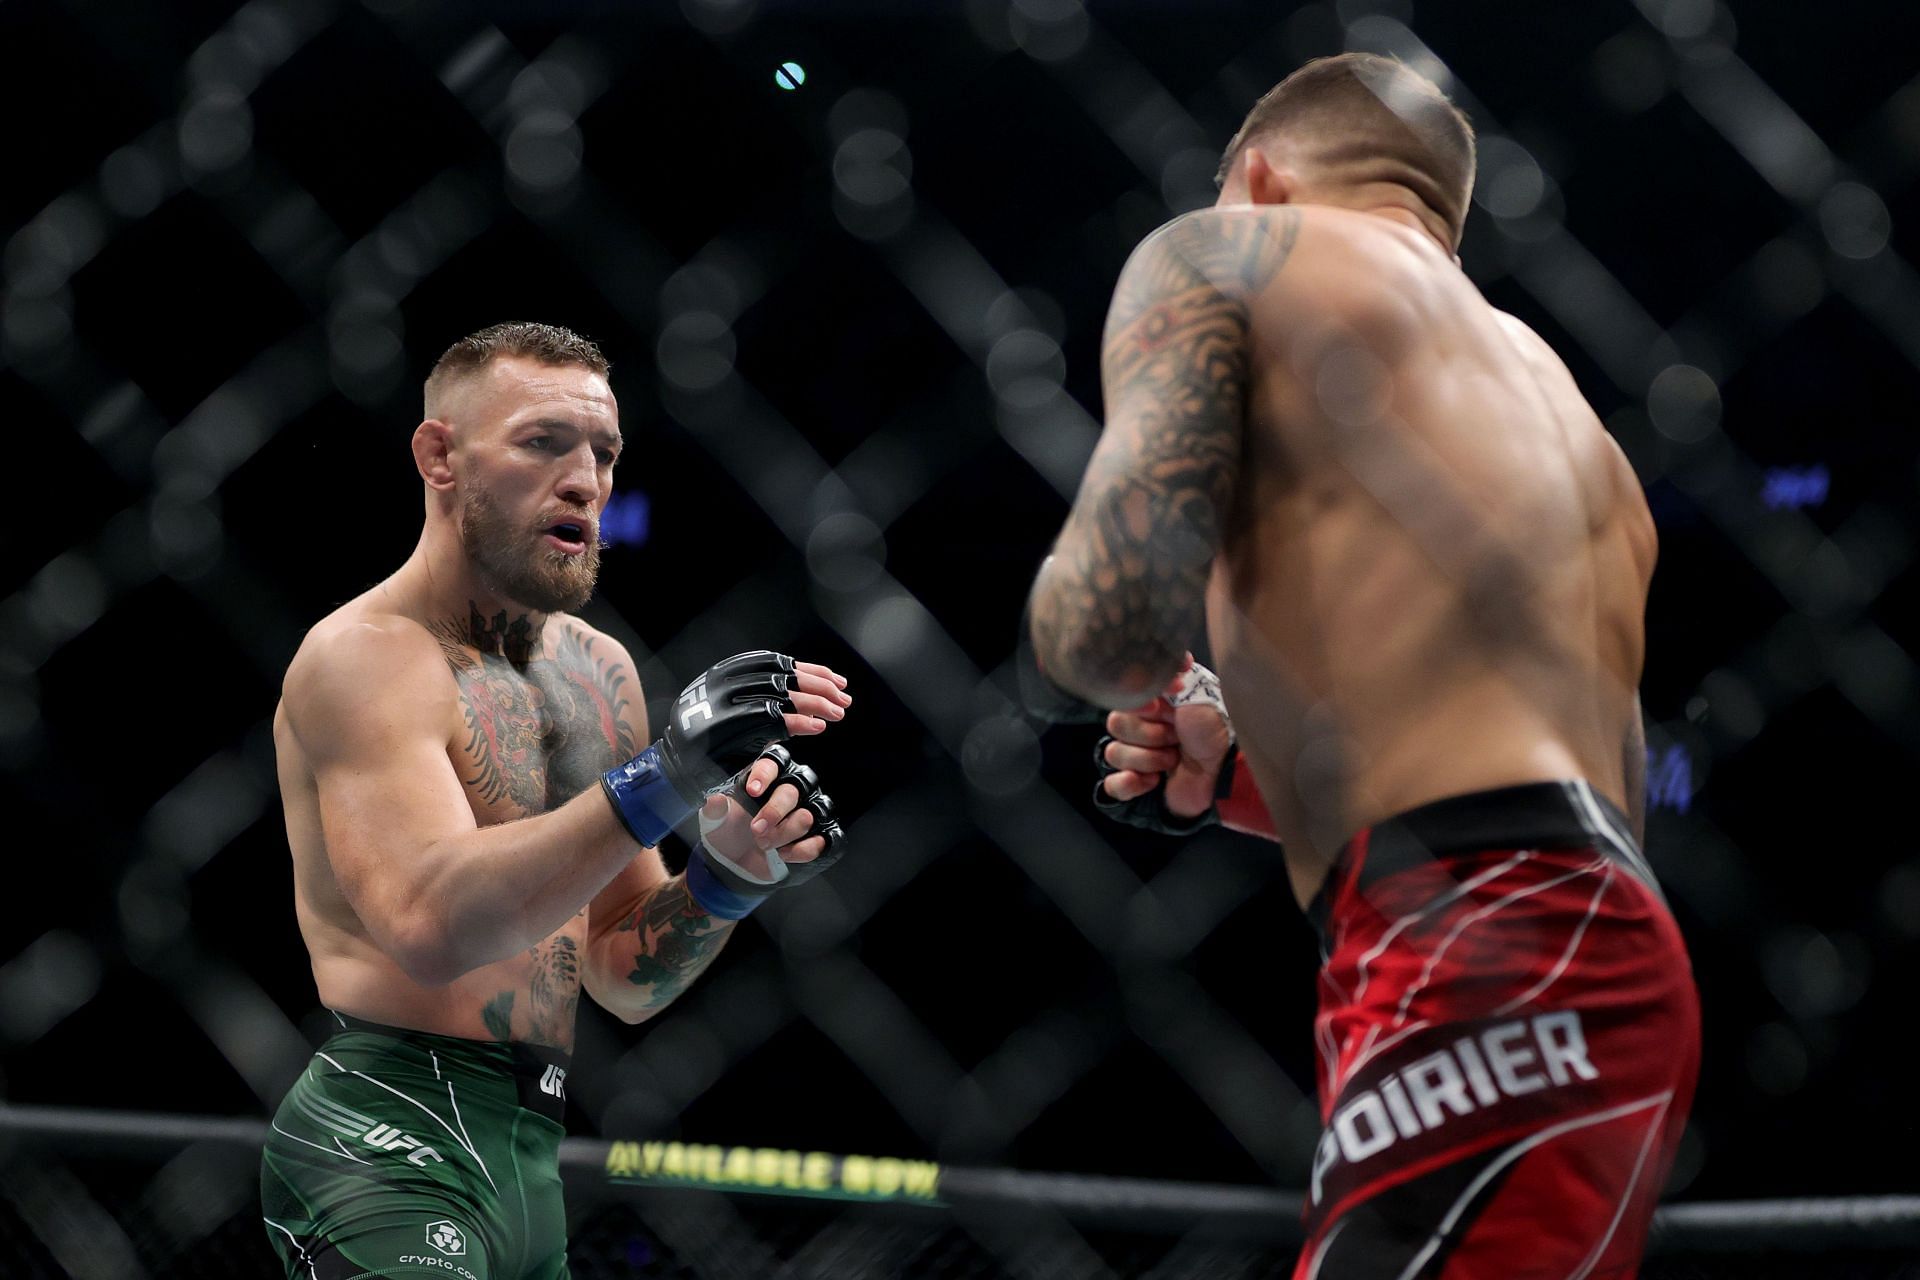 Could 2022 see a fourth fight between Conor McGregor and Dustin Poirier?